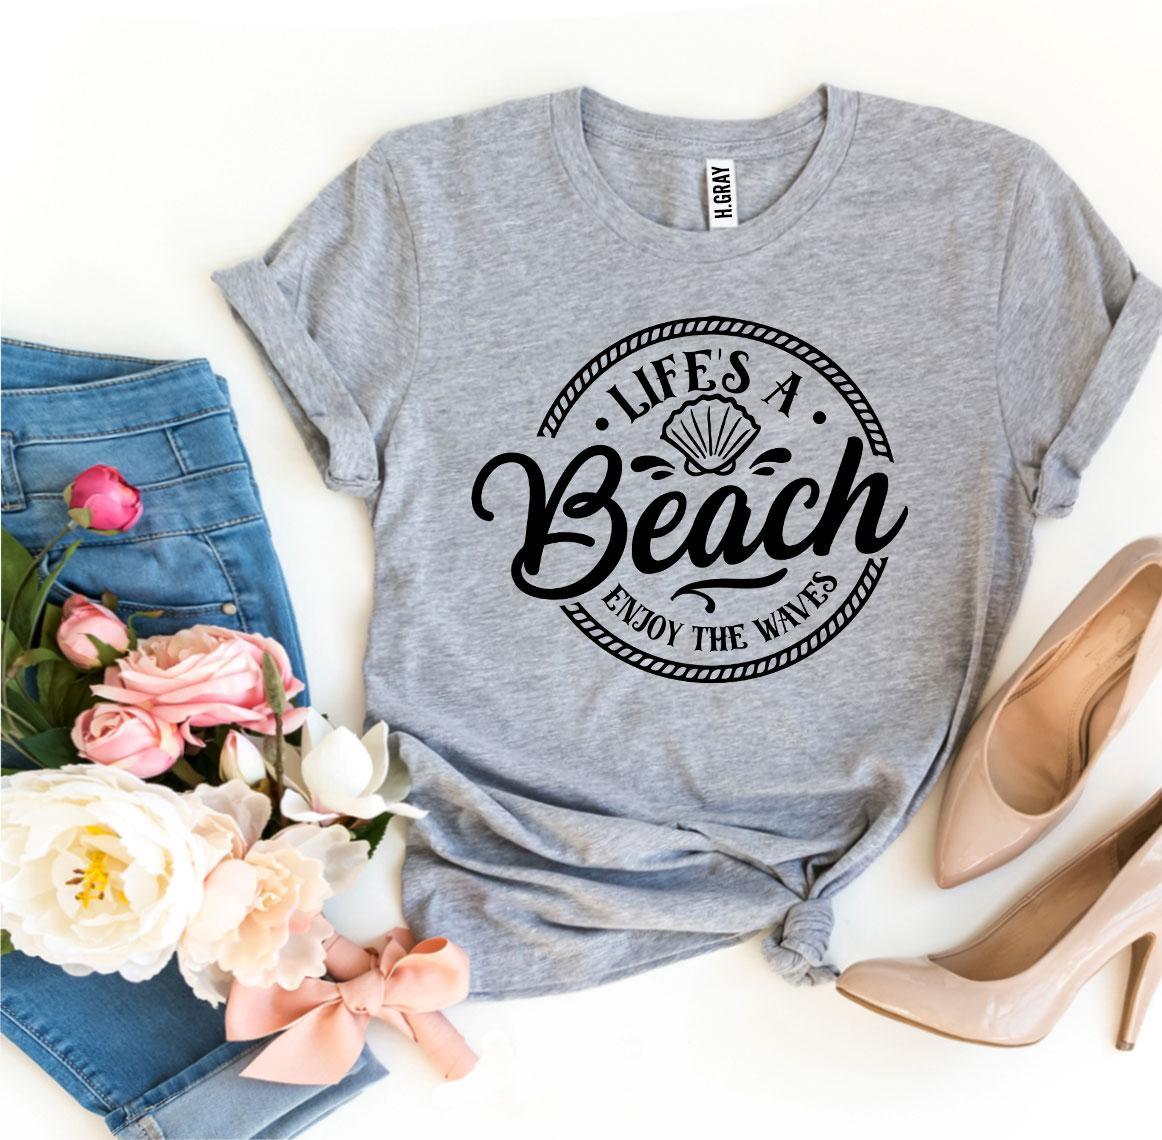 Life’s a Beach Enjoy The Waves T-shirt - VirtuousWares:Global